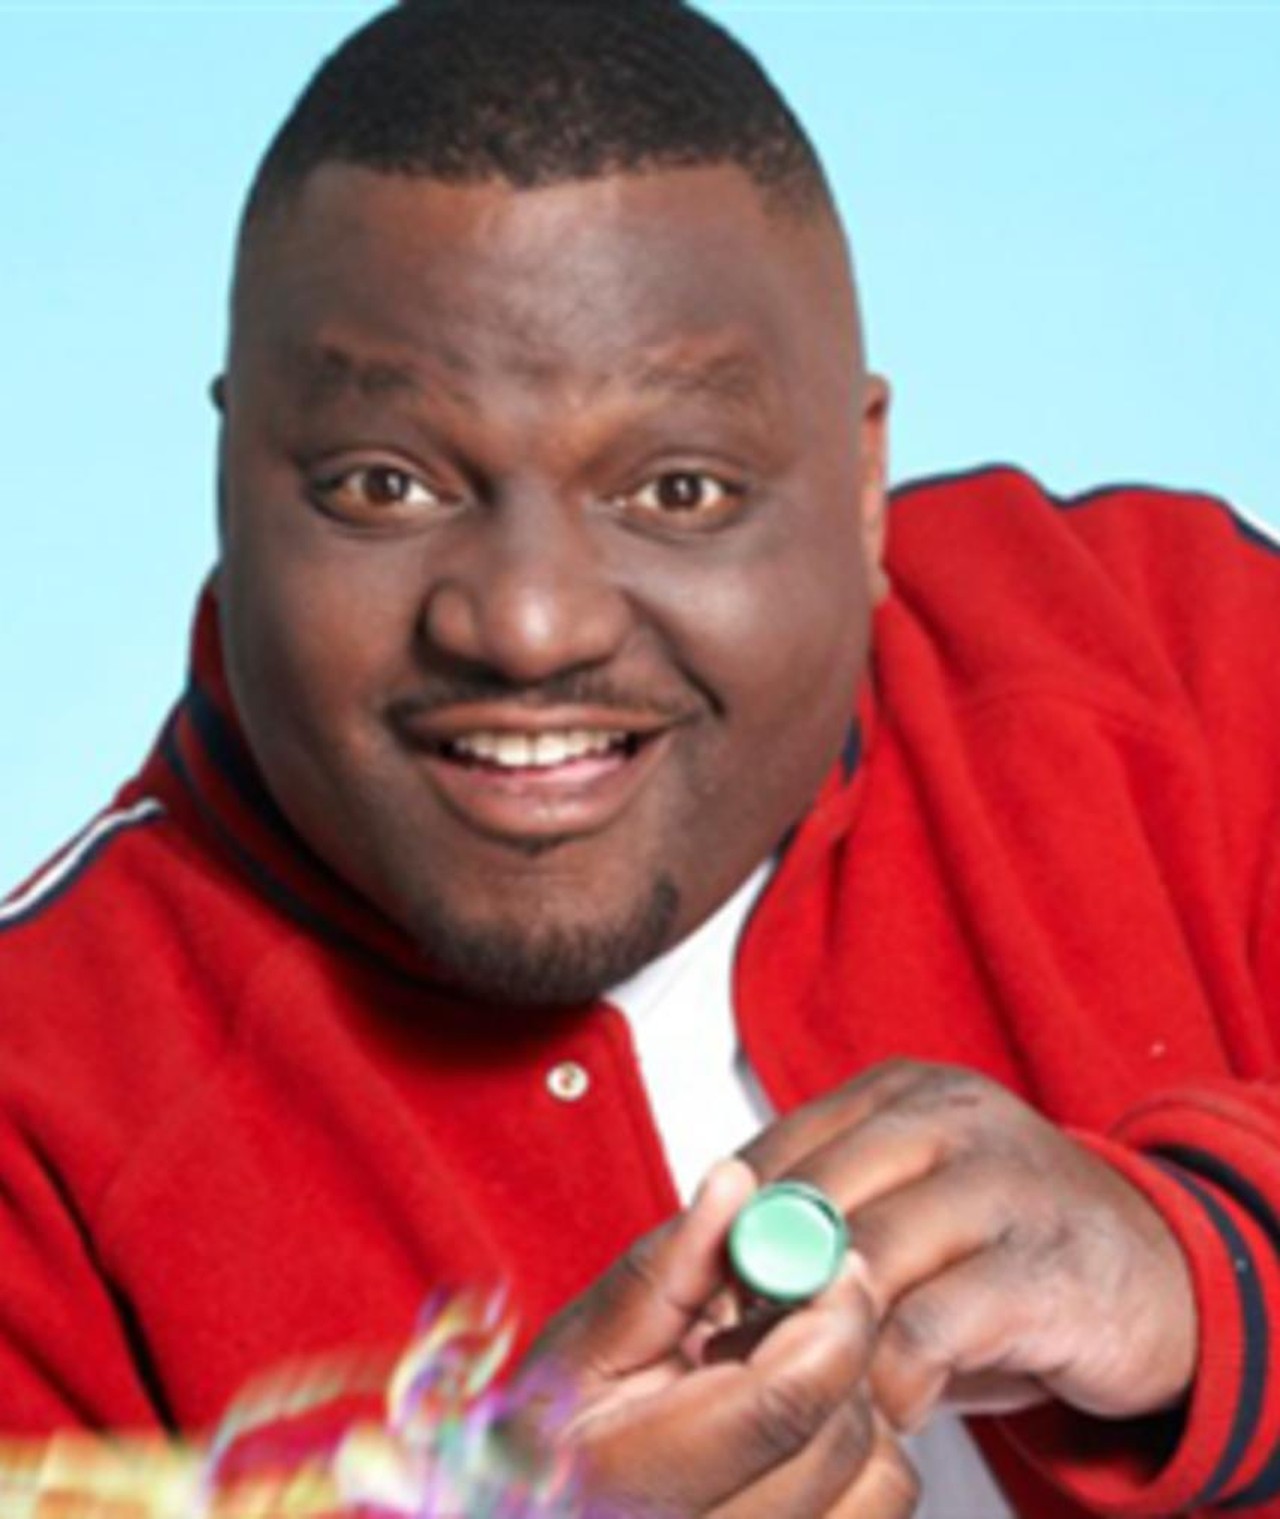 Photo of Aries Spears